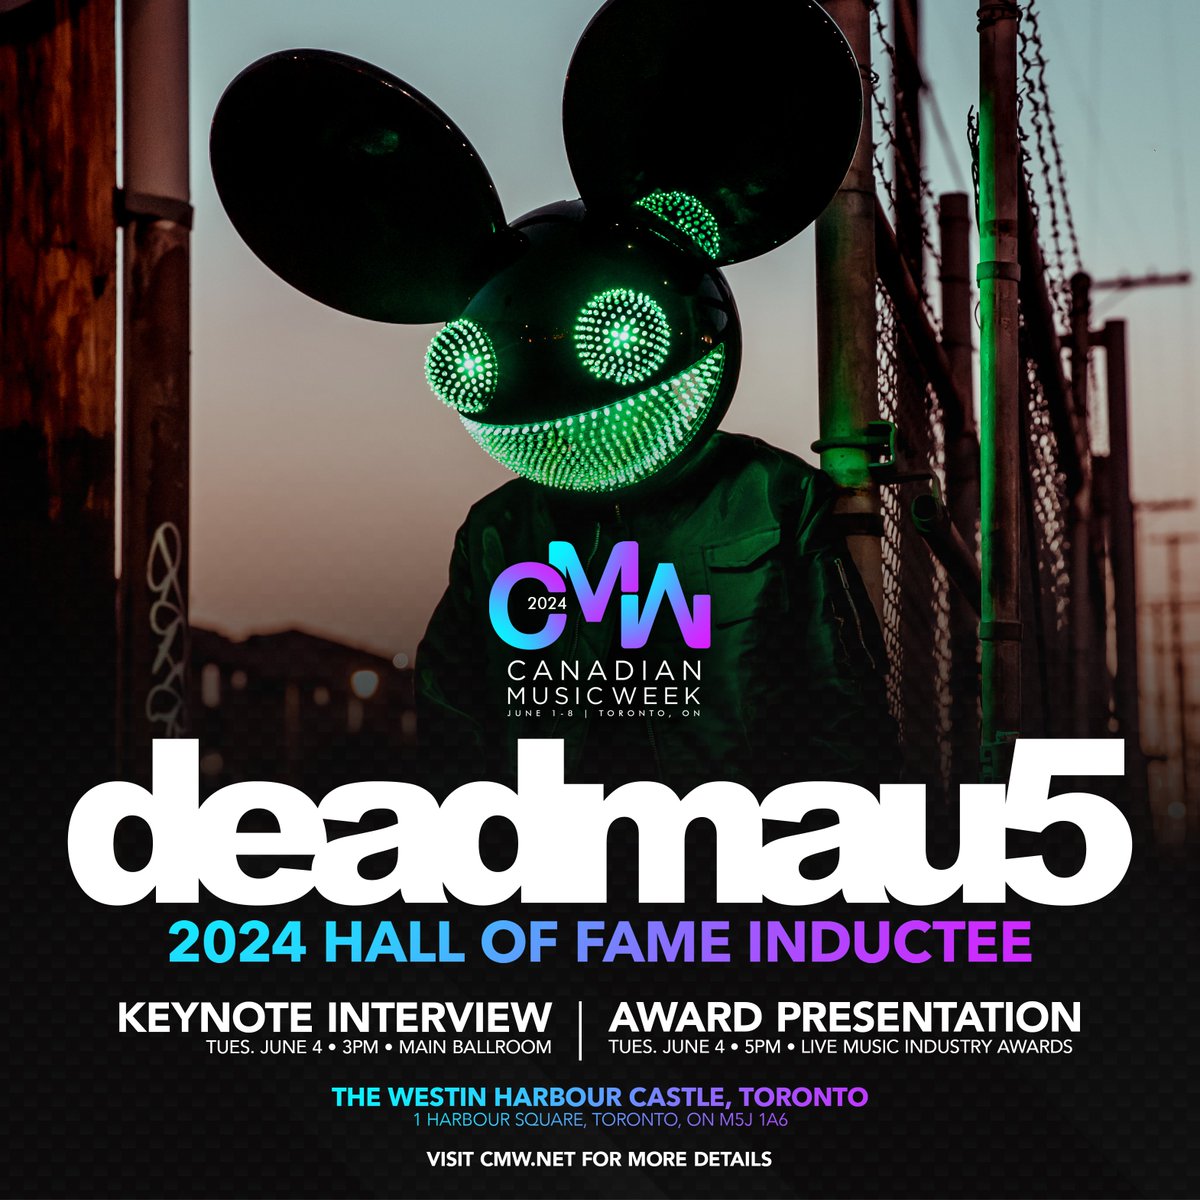 🚨JUST ANNOUNCED🚨 deadmau5, will be inducted into the CMW Hall of Fame!!! Join us on Tuesday, June 4, for a keynote interview with deadmau5 followed by the award presentation at the Live Music Industry Awards. Tickets and passes are on sale now. bit.ly/4cZwpAE 🎟 🔗